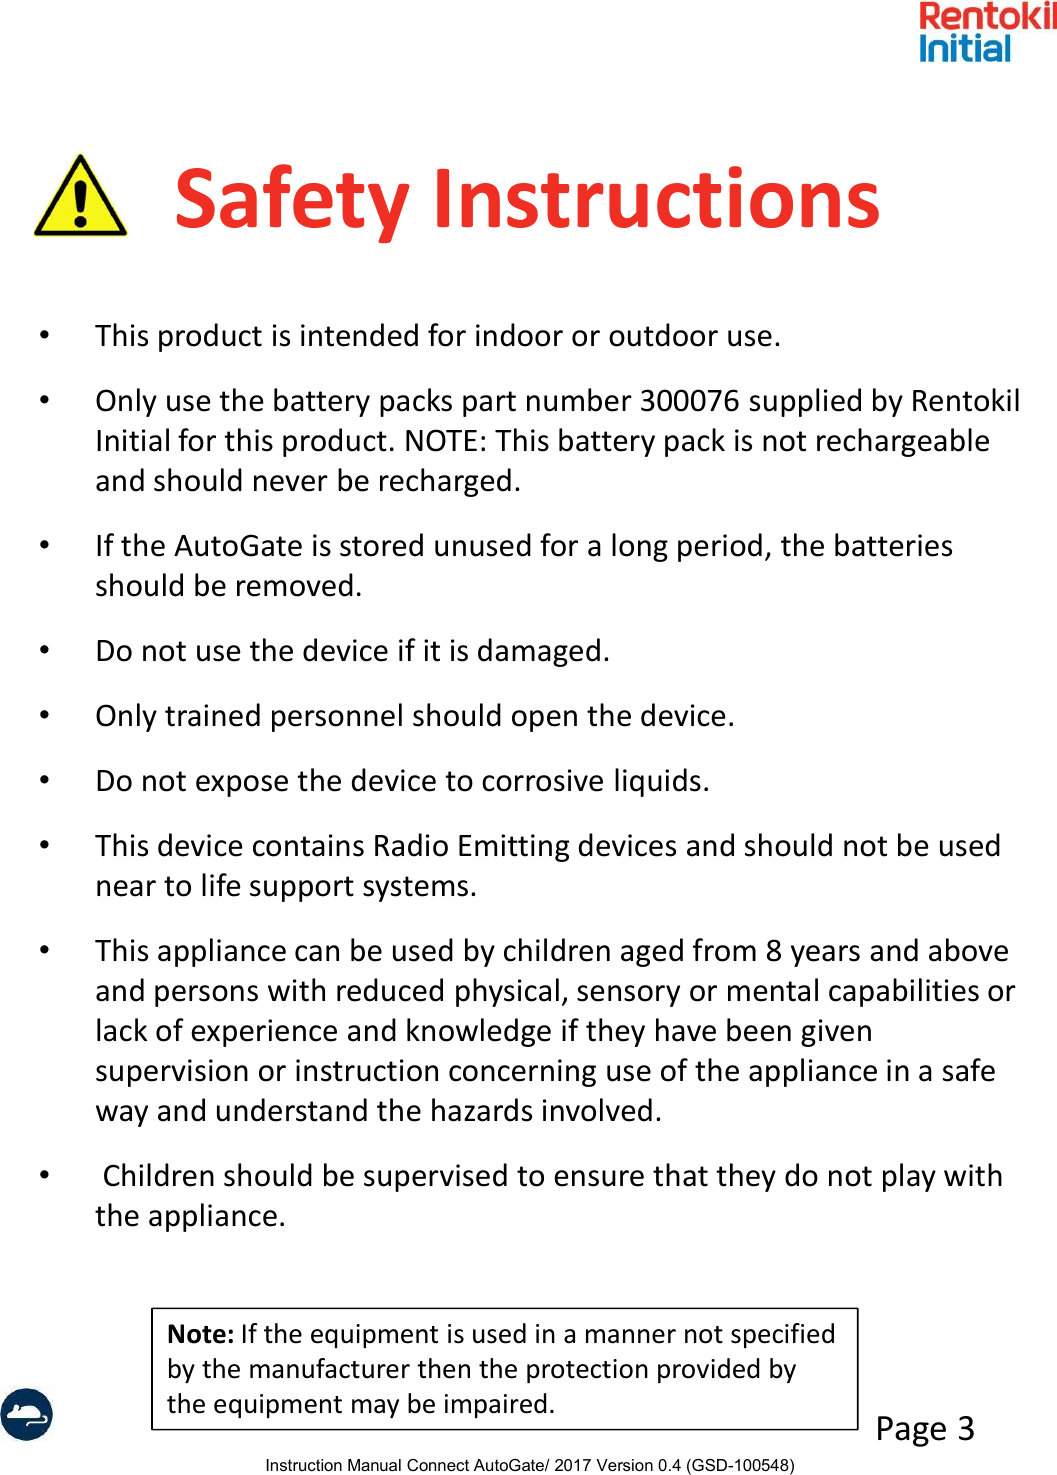 Instruction Manual Connect AutoGate/ 2017 Version 0.4 (GSD-100548)Page 3Safety Instructions•This product is intended for indoor or outdoor use.•Only use the battery packs part number 300076 supplied by Rentokil Initial for this product. NOTE: This battery pack is not rechargeable and should never be recharged.•If the AutoGate is stored unused for a long period, the batteries should be removed.•Do not use the device if it is damaged.•Only trained personnel should open the device. •Do not expose the device to corrosive liquids.•This device contains Radio Emitting devices and should not be used near to life support systems.•This appliance can be used by children aged from 8 years and above and persons with reduced physical, sensory or mental capabilities or lack of experience and knowledge if they have been given supervision or instruction concerning use of the appliance in a safe way and understand the hazards involved.•Children should be supervised to ensure that they do not play with the appliance.Note: If the equipment is used in a manner not specified by the manufacturer then the protection provided by the equipment may be impaired.